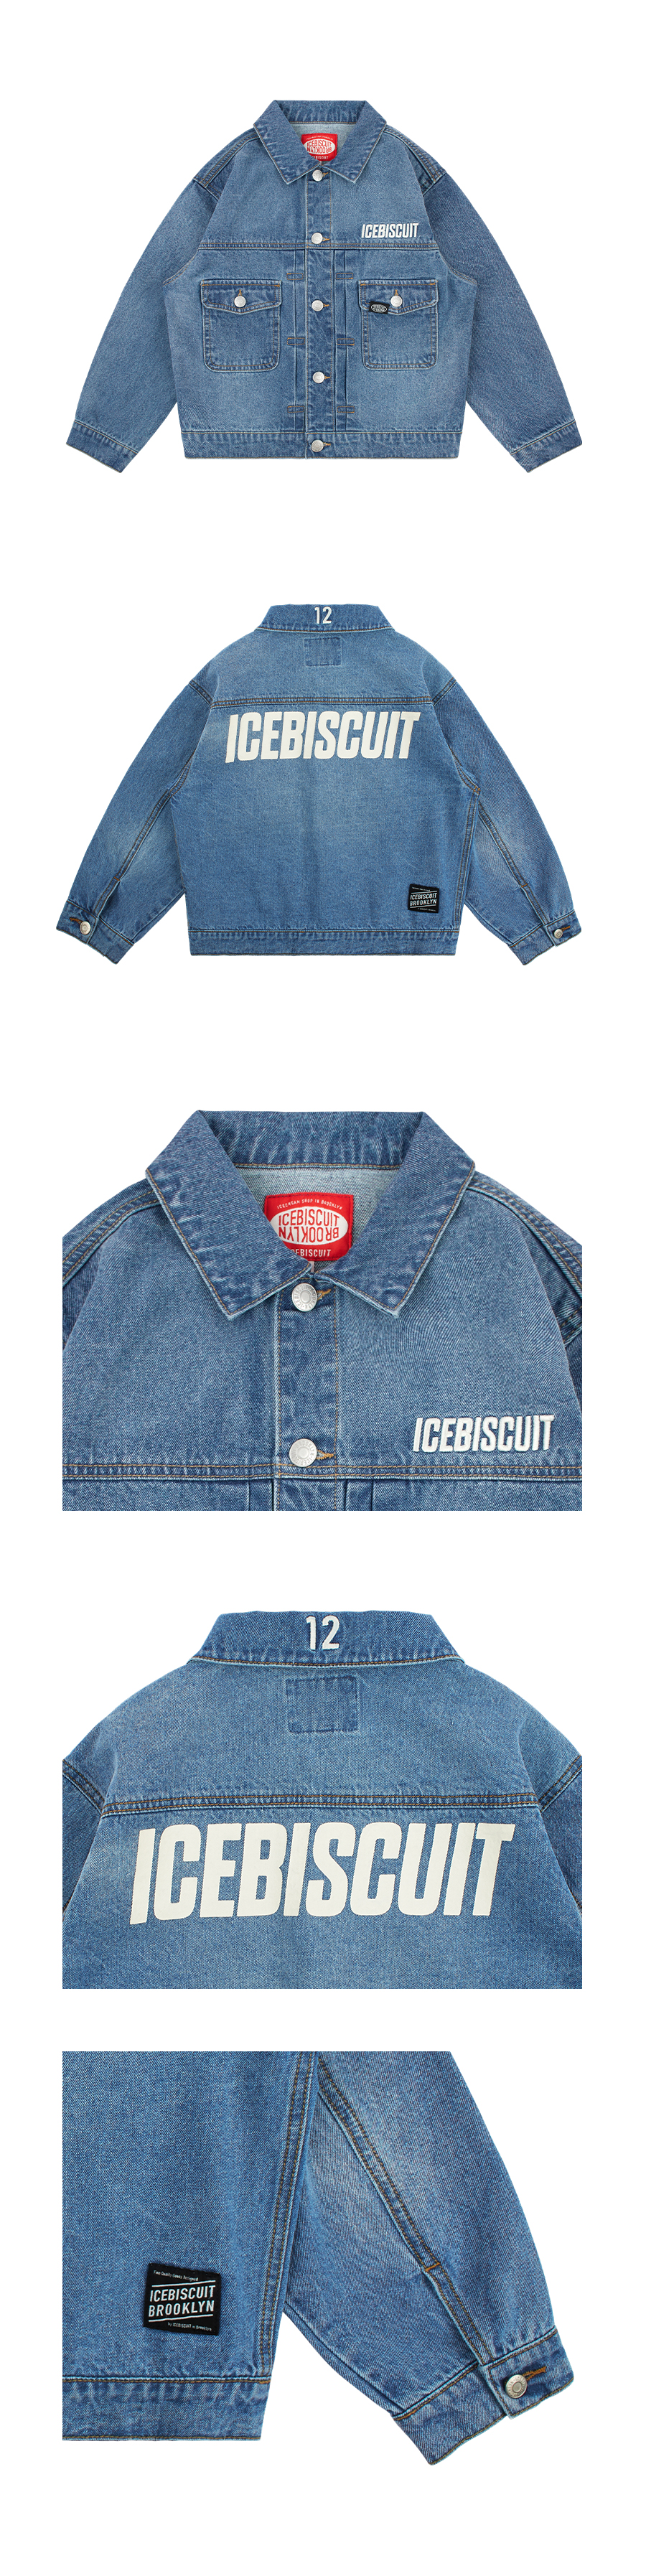 Icebiscuit letter point denim jacket 상세 이미지